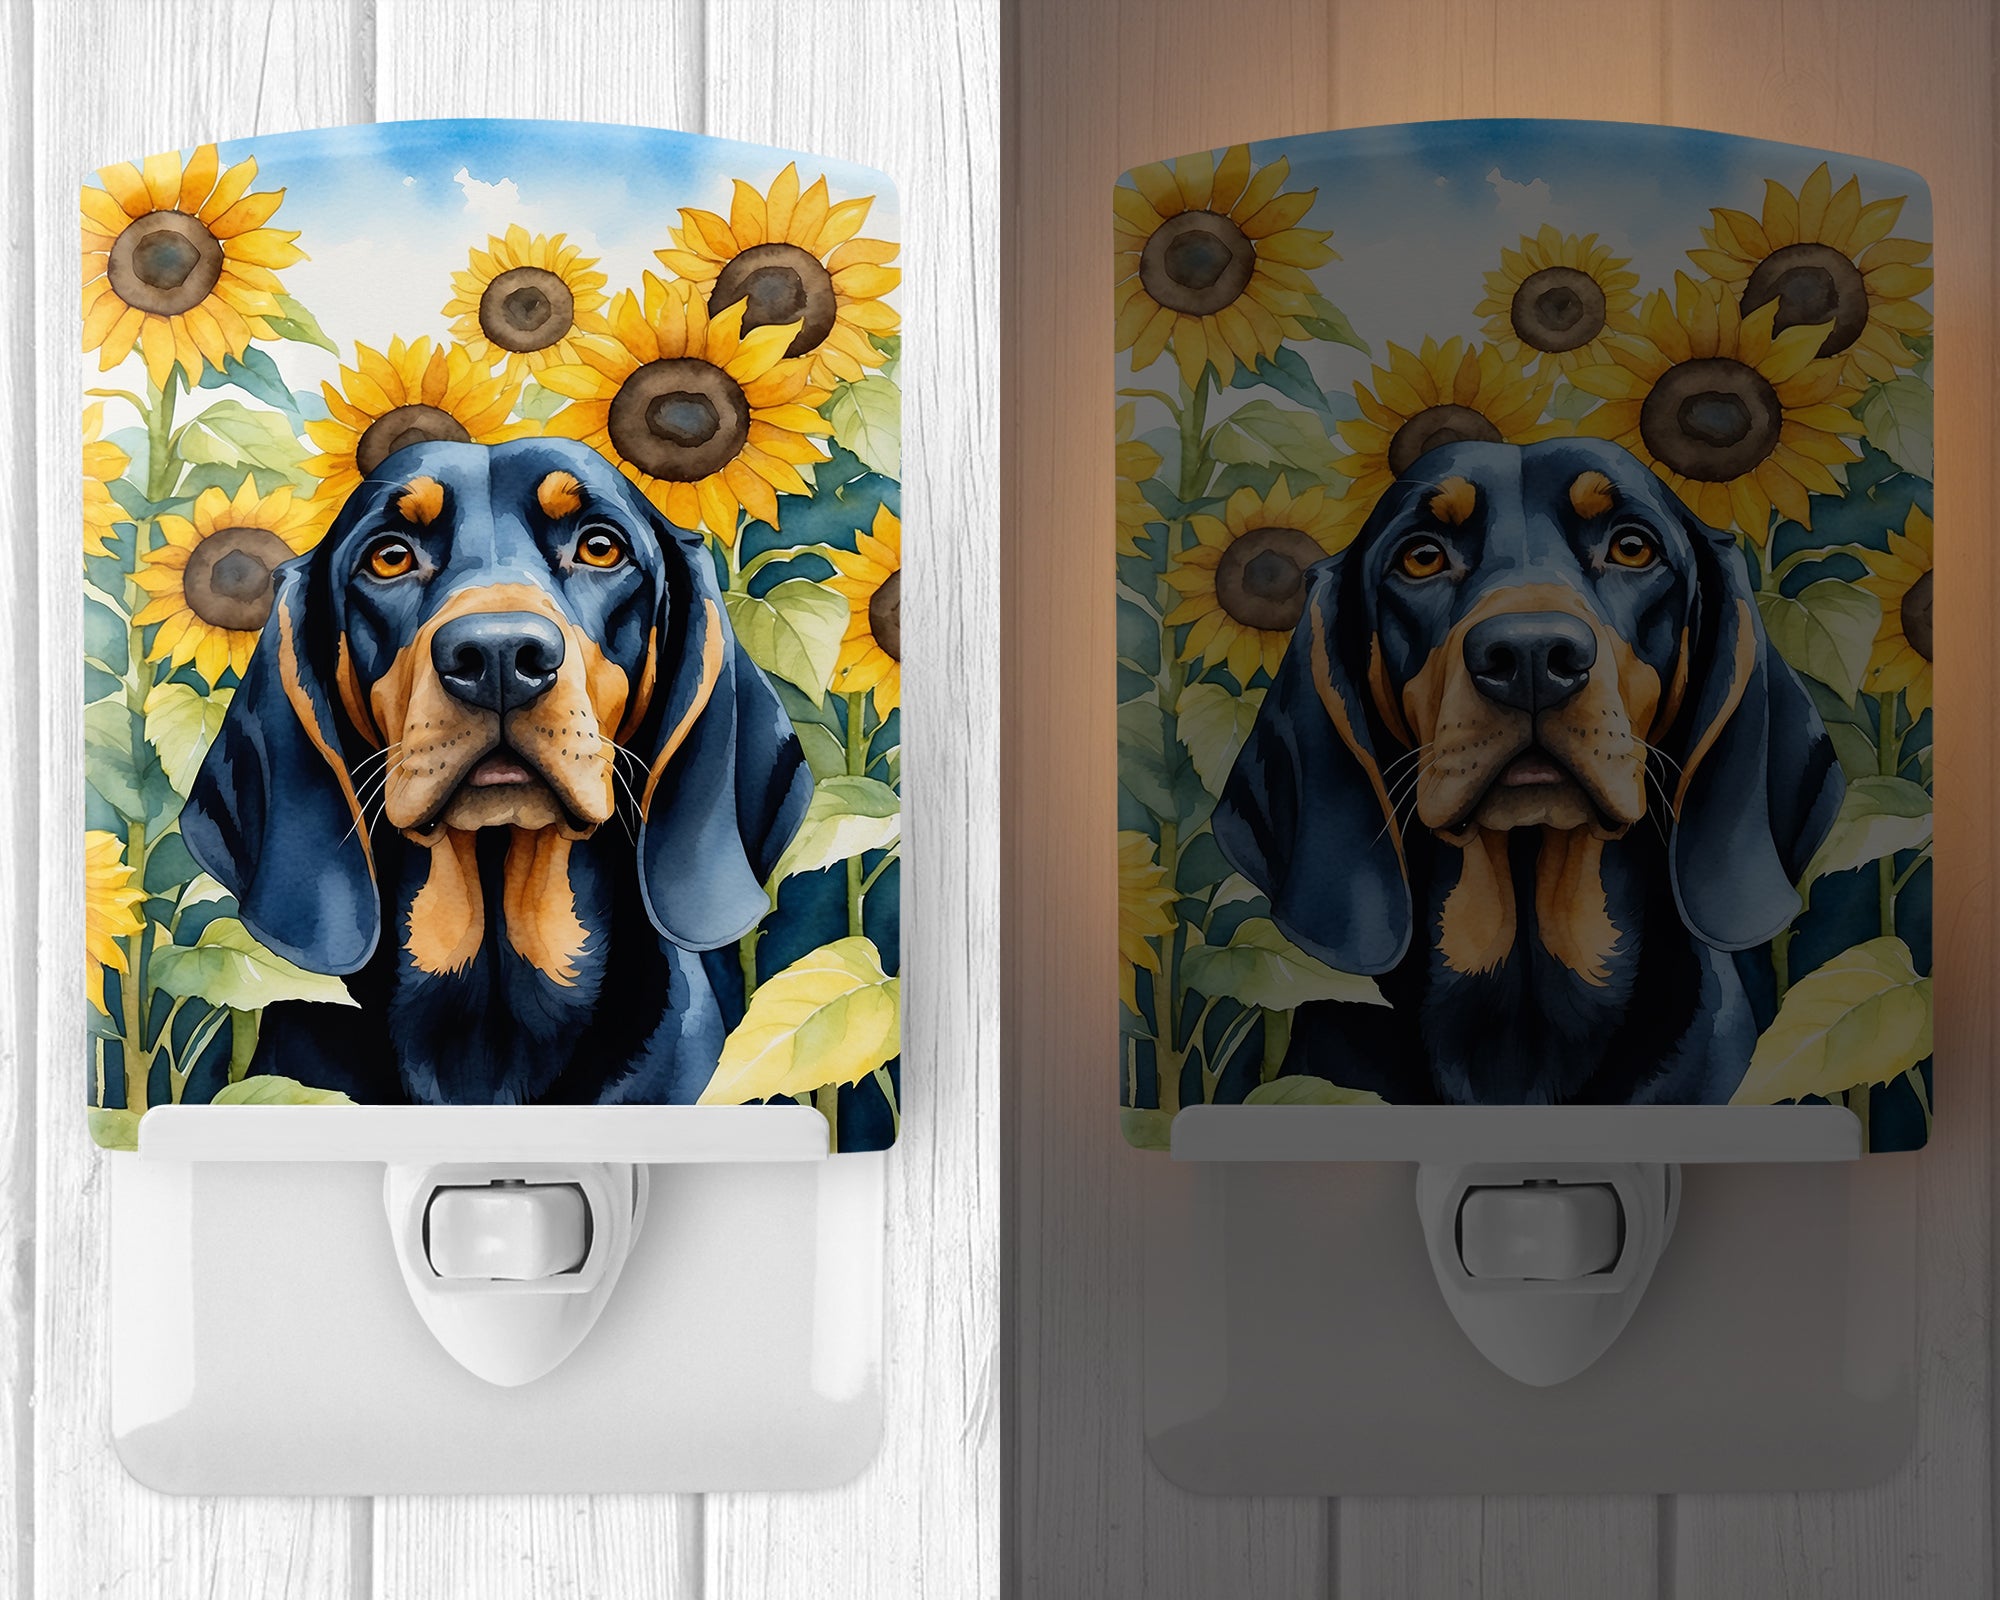 Buy this Black and Tan Coonhound in Sunflowers Ceramic Night Light